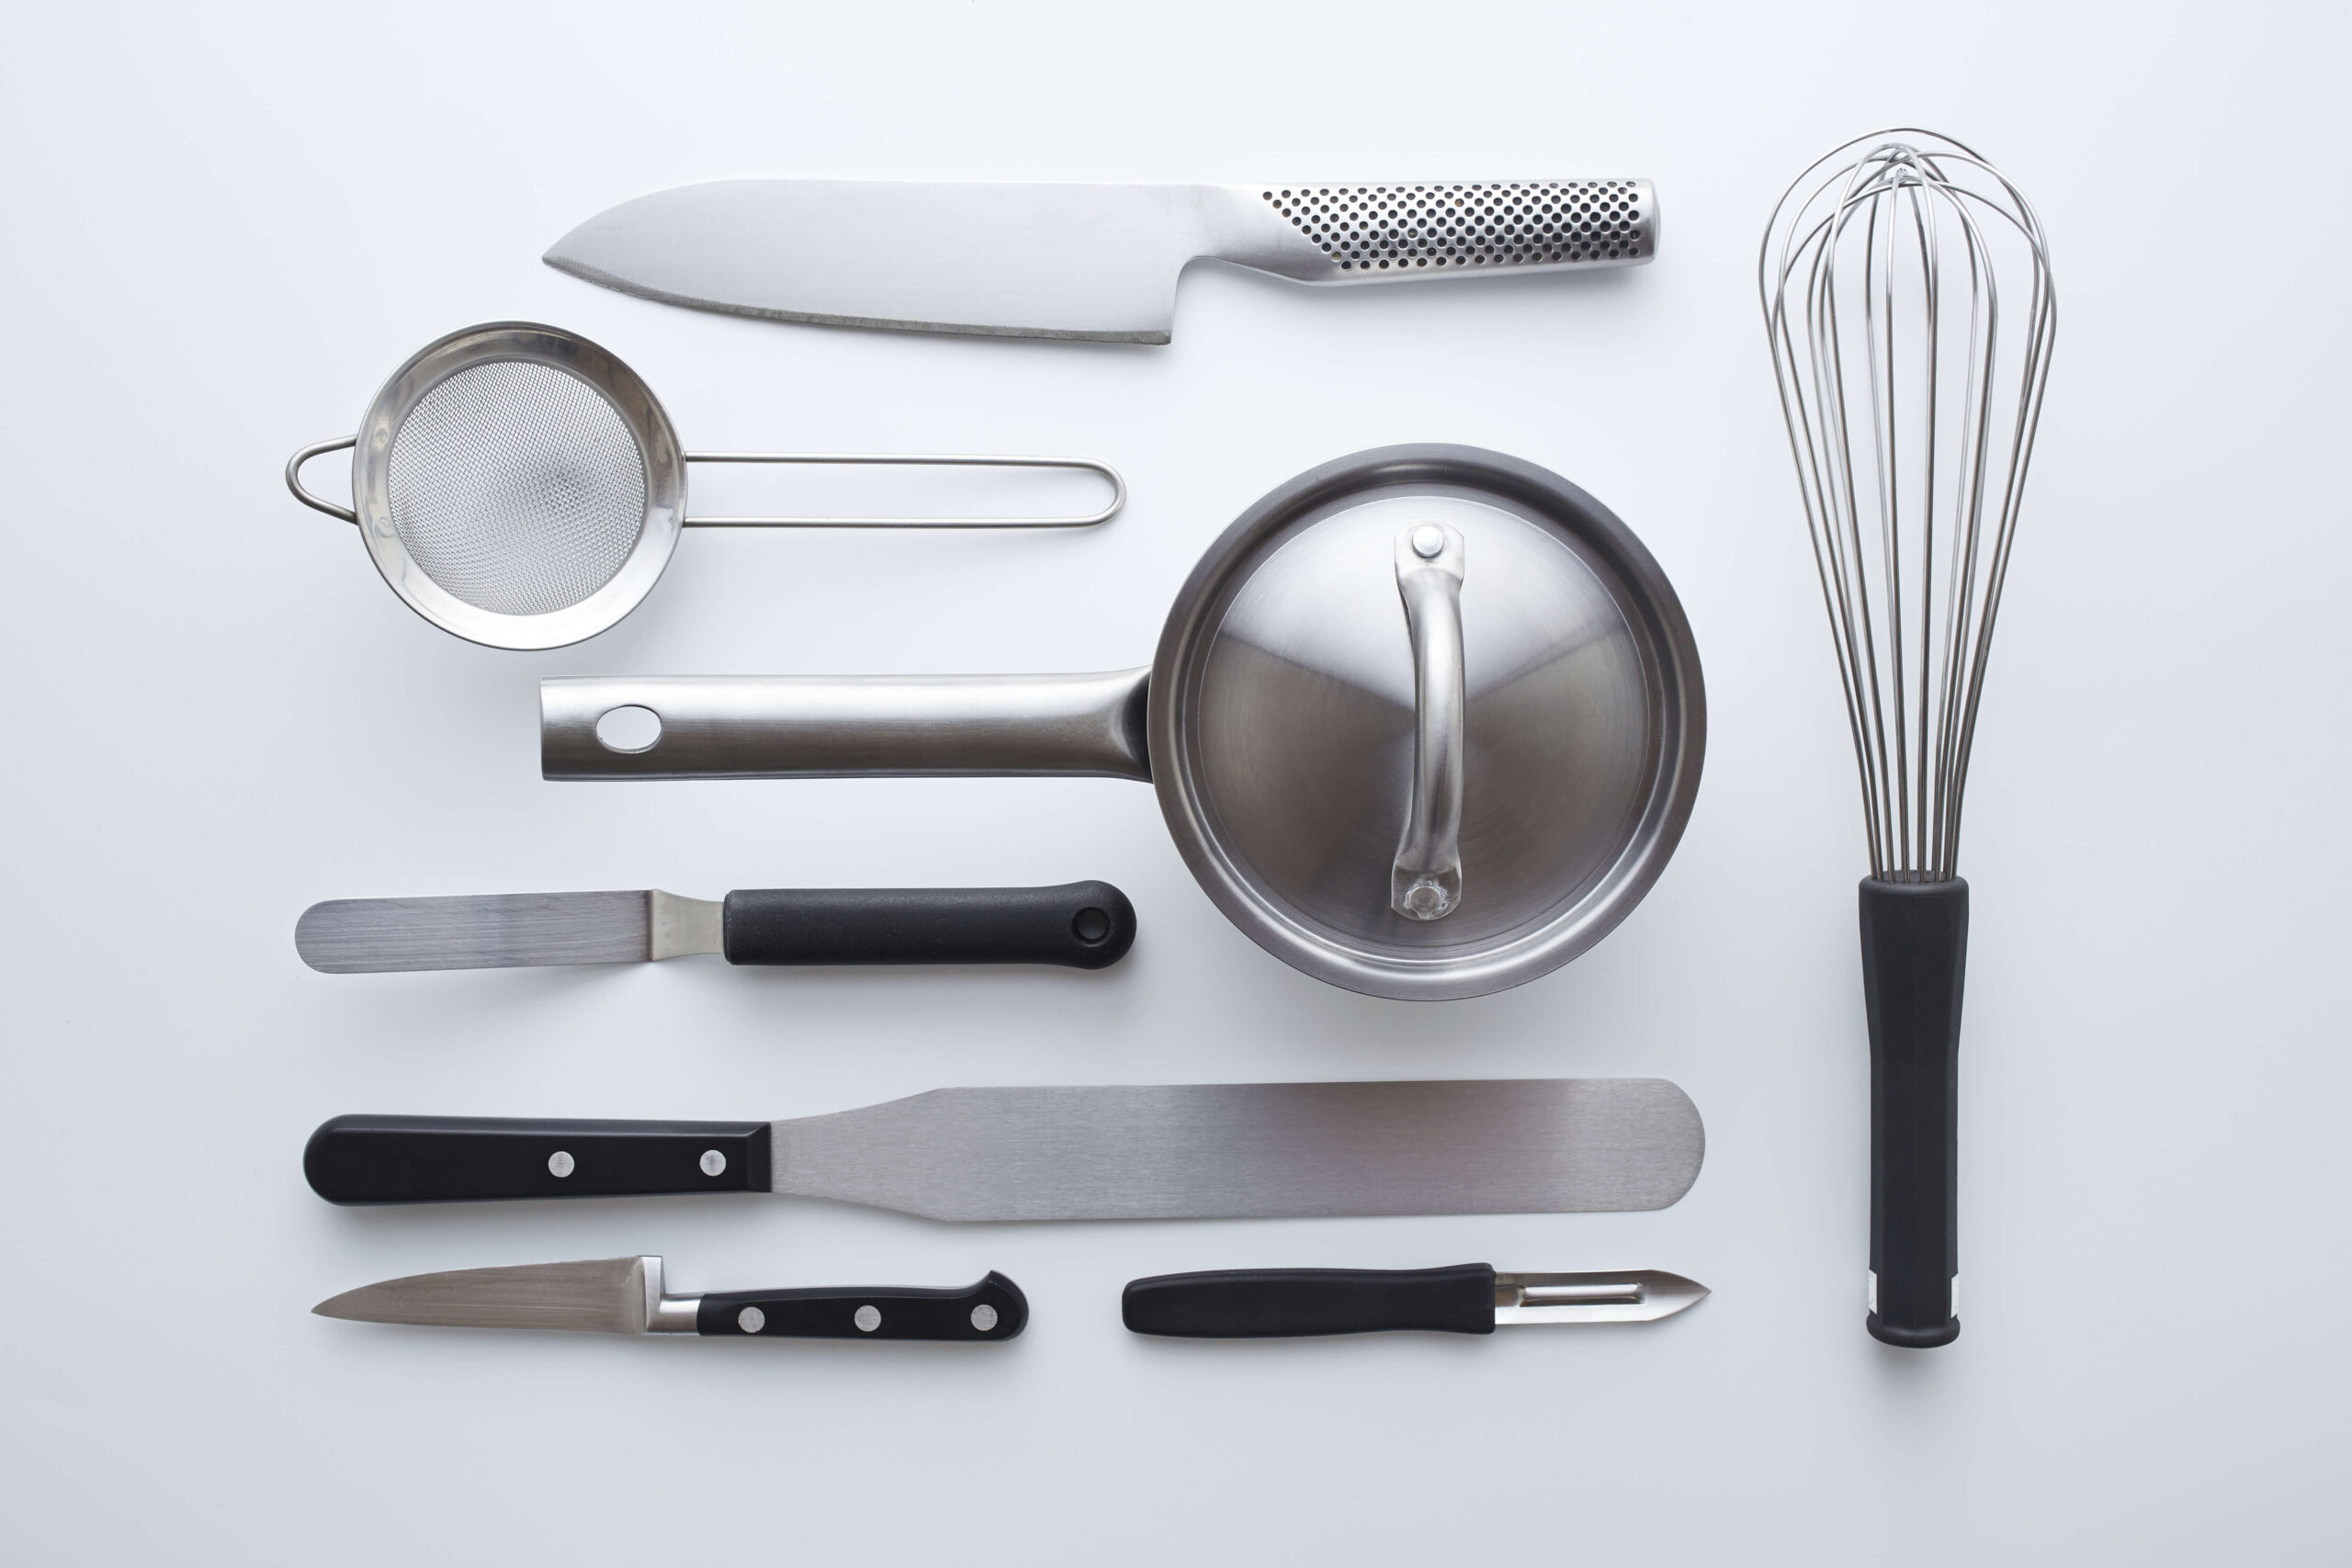 Safe food handling during proper cleaning of spatulas